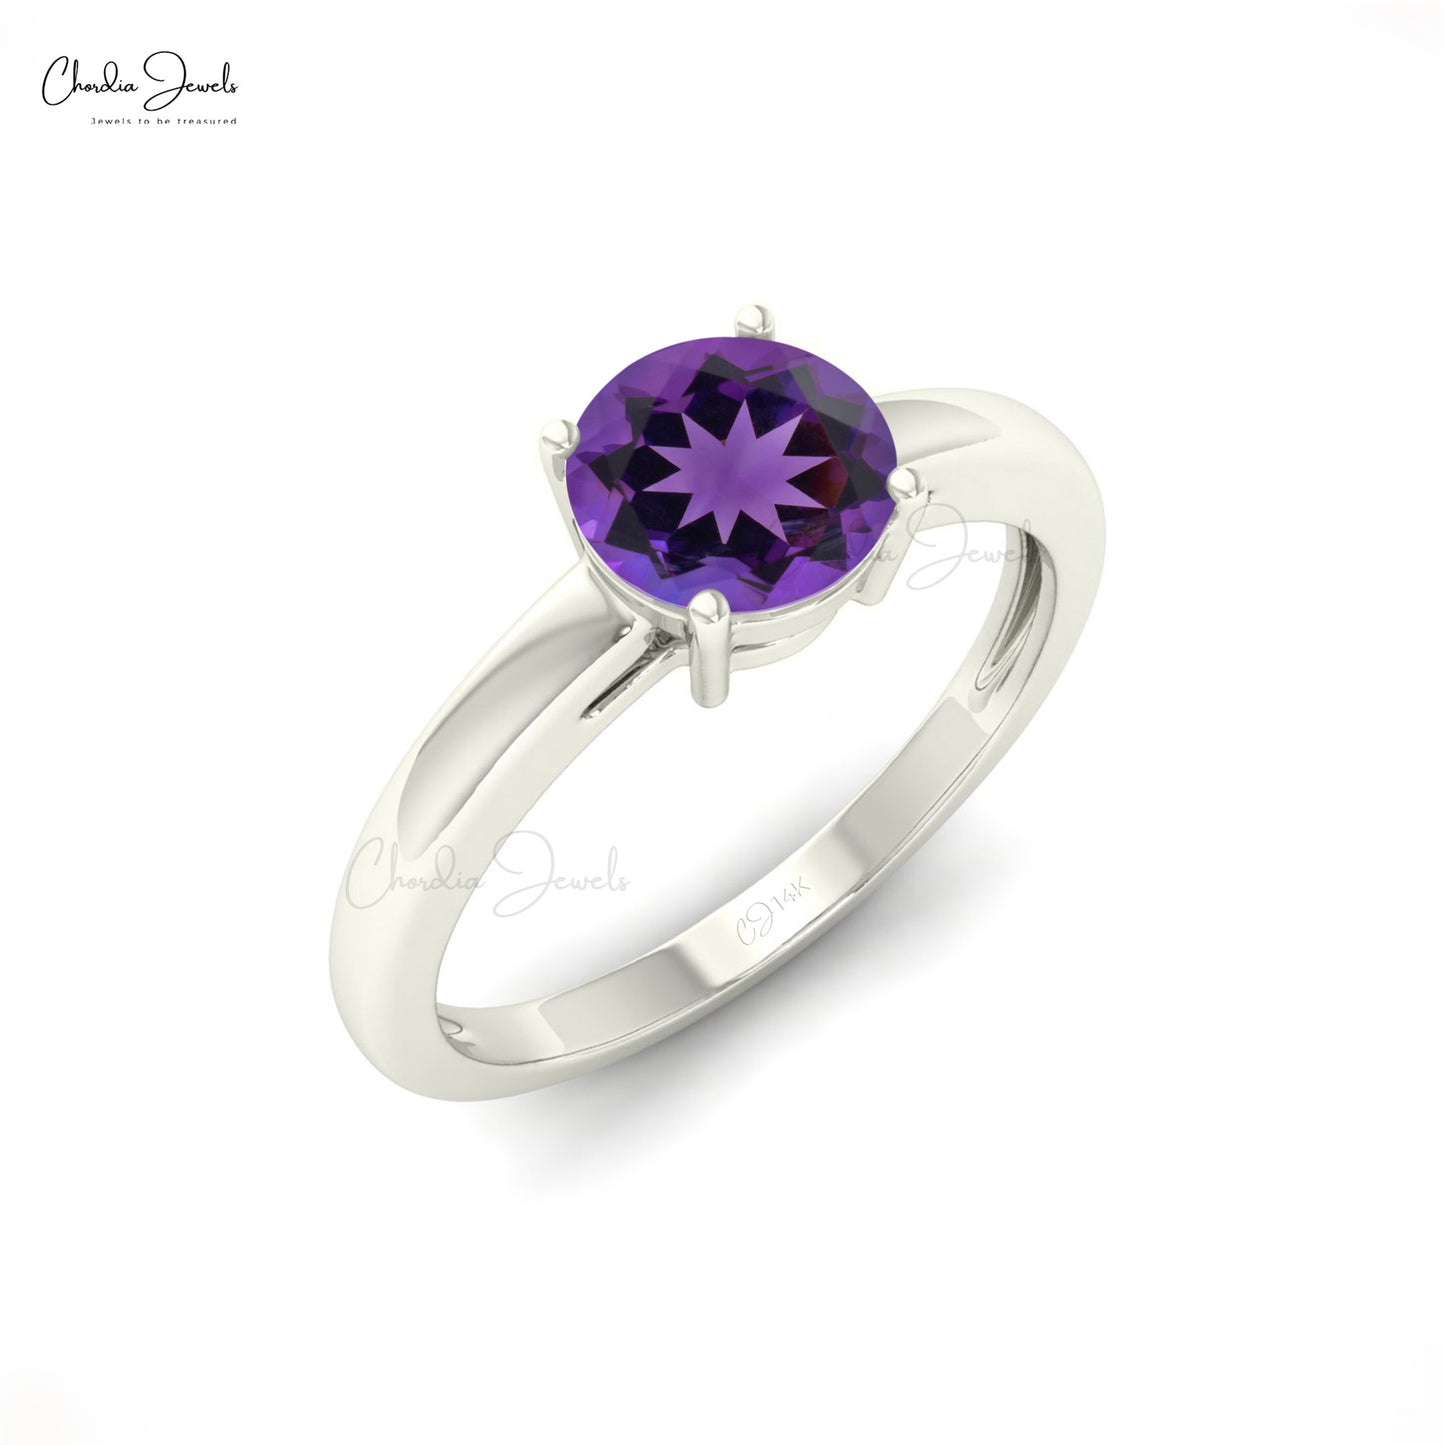 Buy Rose De France Amethyst Ring, Simulated Purple Diamond Accent Ring,  Heart Ring, Sterling Silver Ring, Birthday Gift 1.85 ctw at ShopLC.